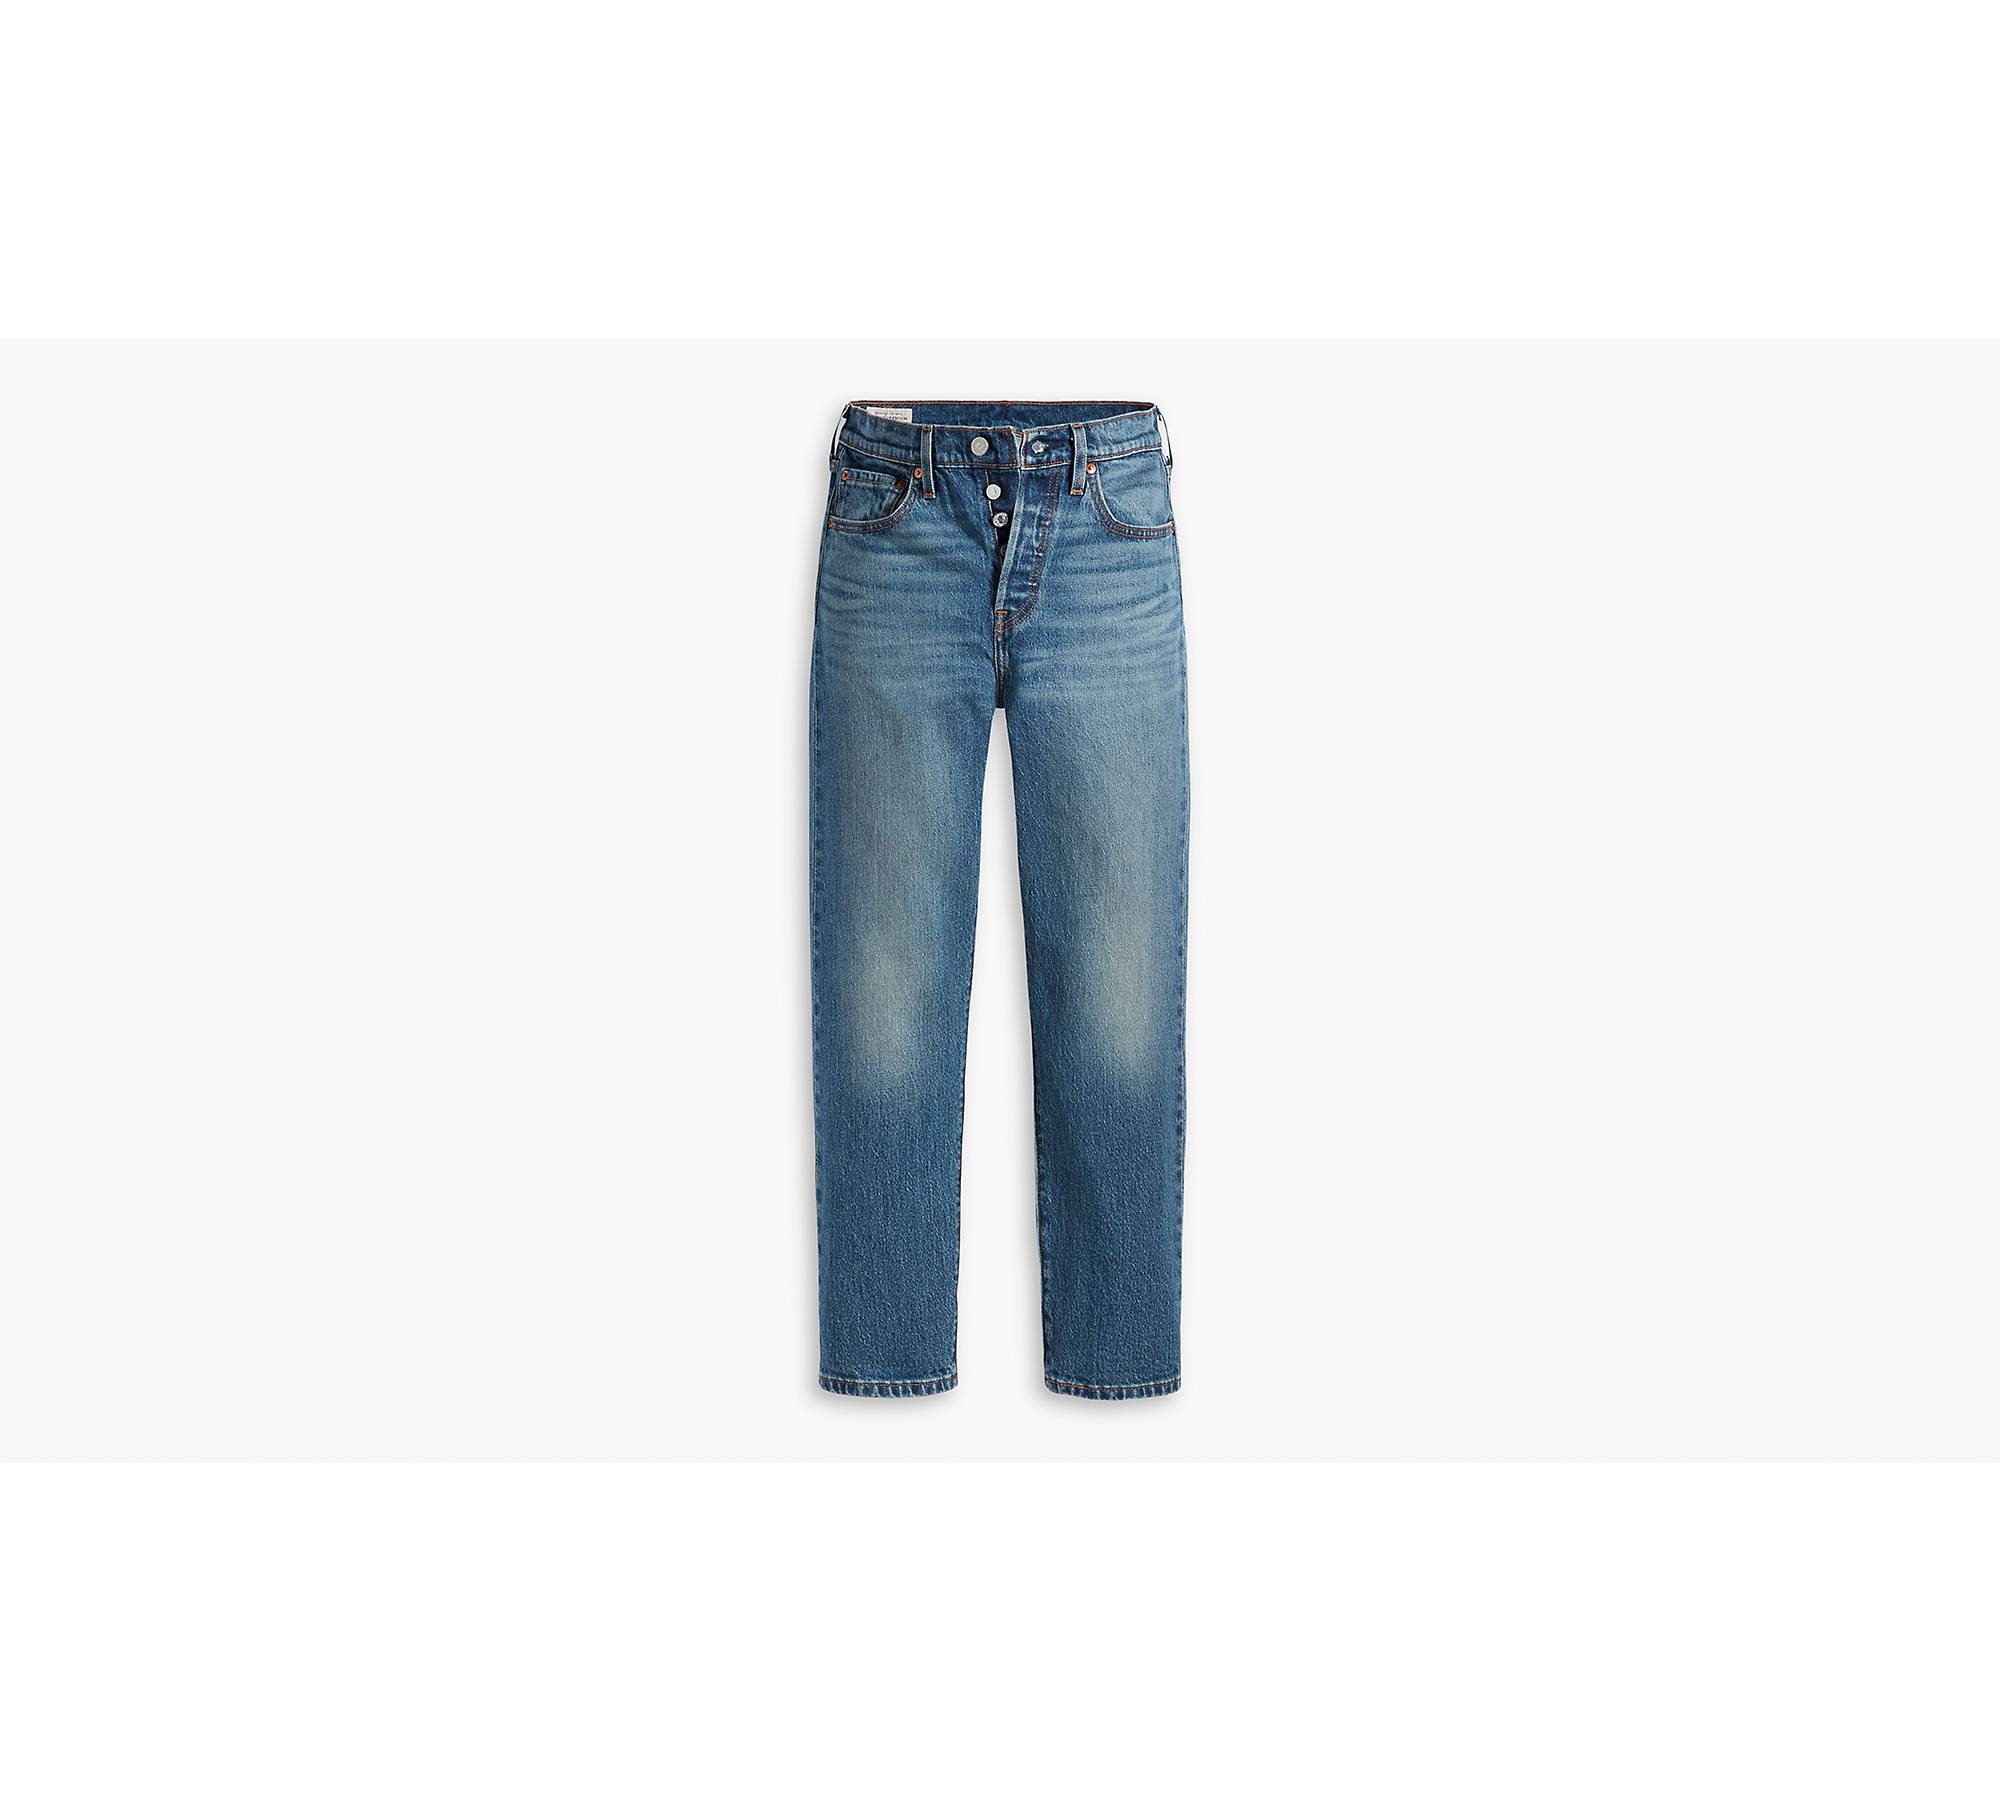 Jeans Zw Premium Cropped Snake Print - Recto-jeans-mujer